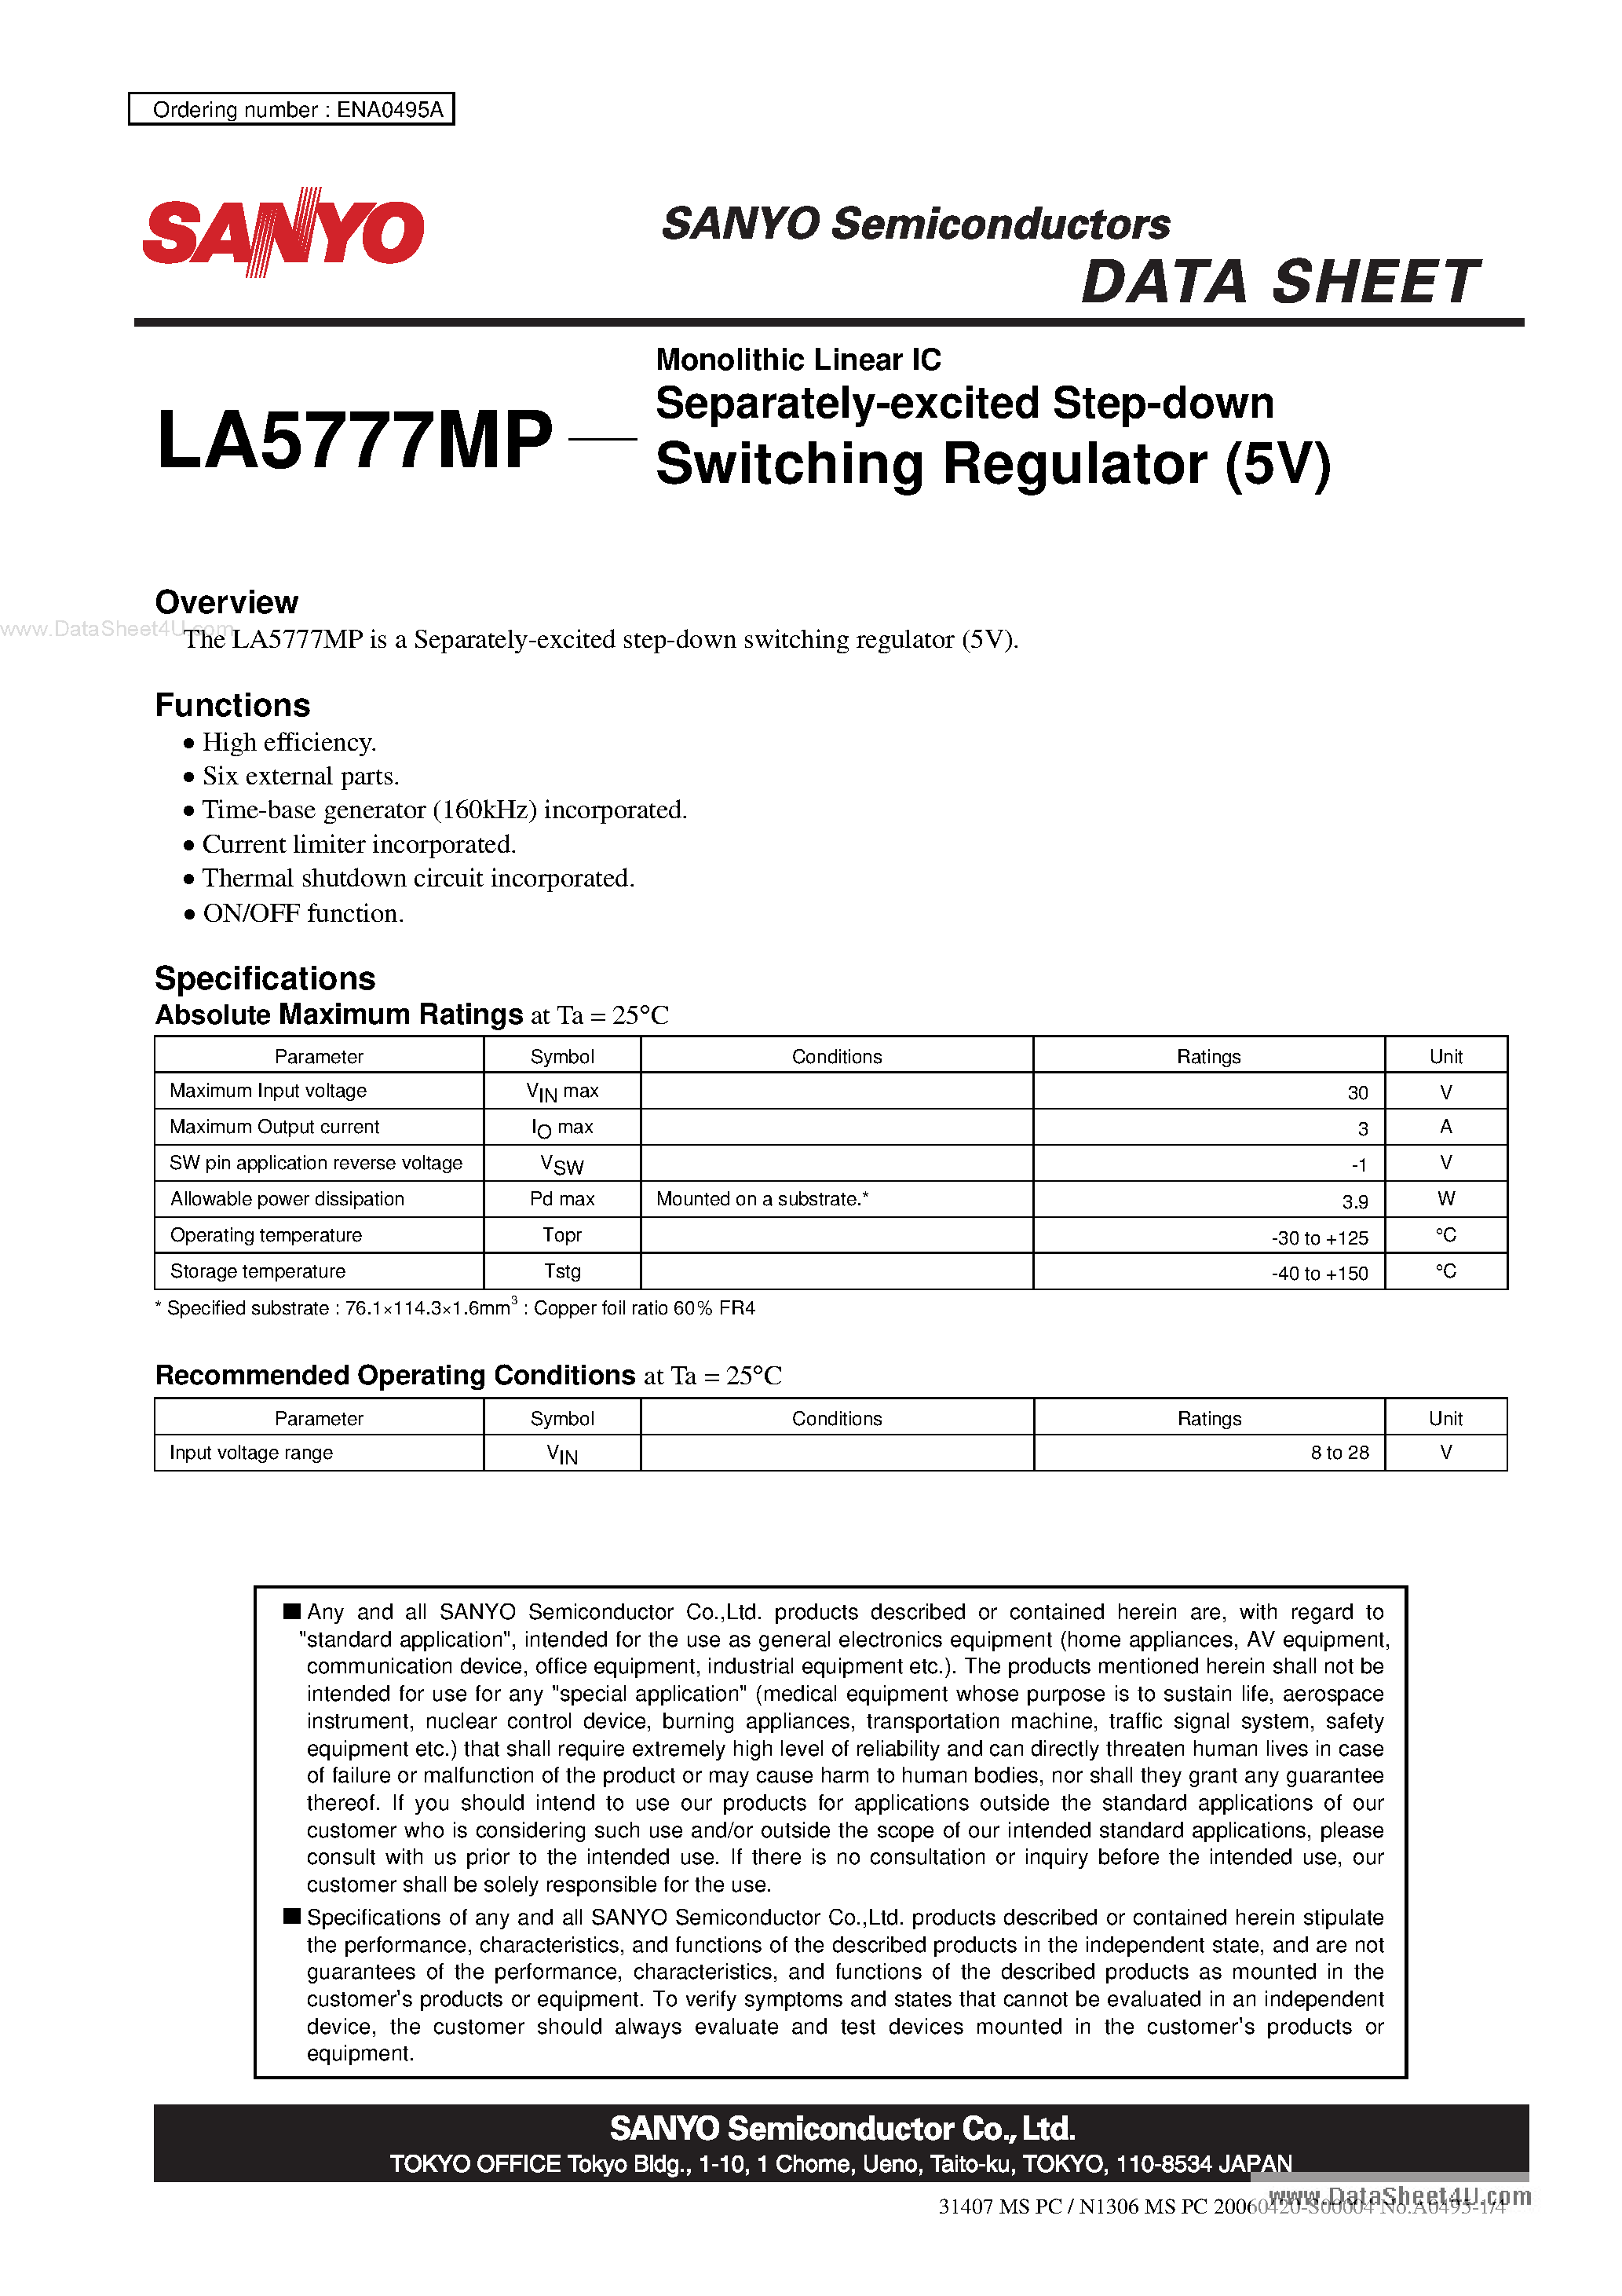 Datasheet LA5777MP - Monolithic Linear IC Separately-excited Step-down Switching Regulator page 1